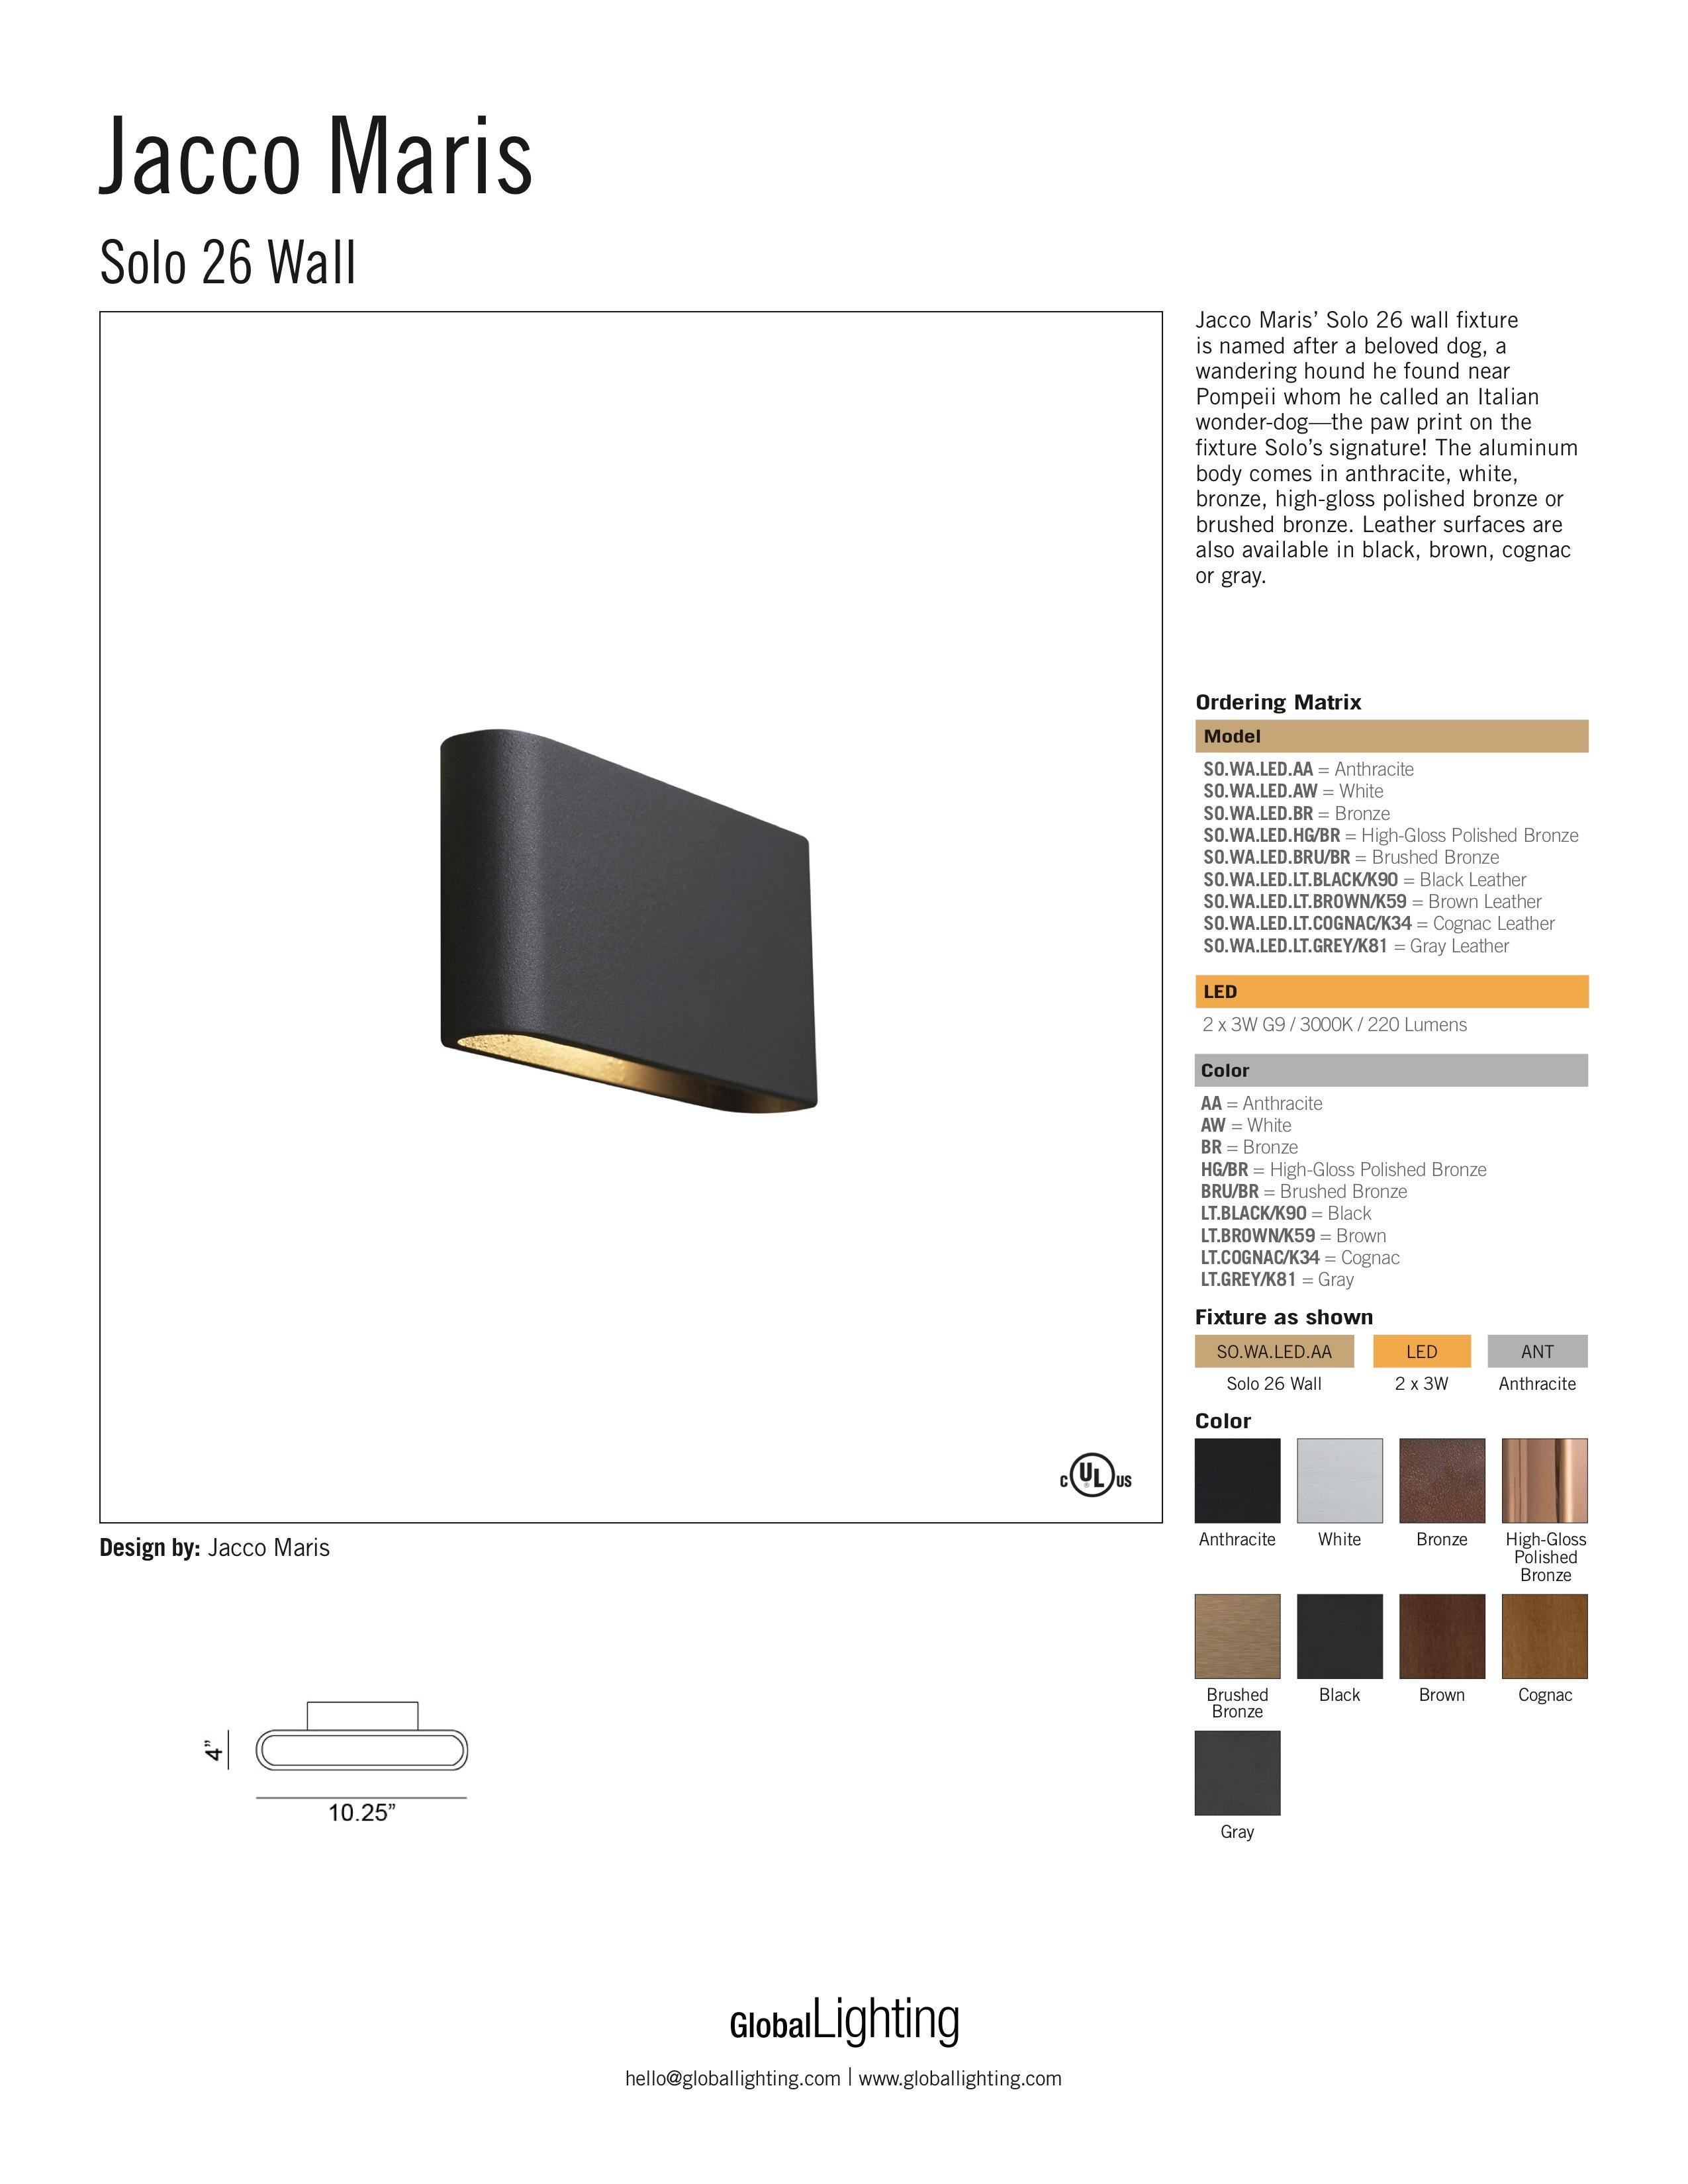 Solo 26 Wall Light by Jacco Maris im Zustand „Neu“ im Angebot in Yonkers, NY